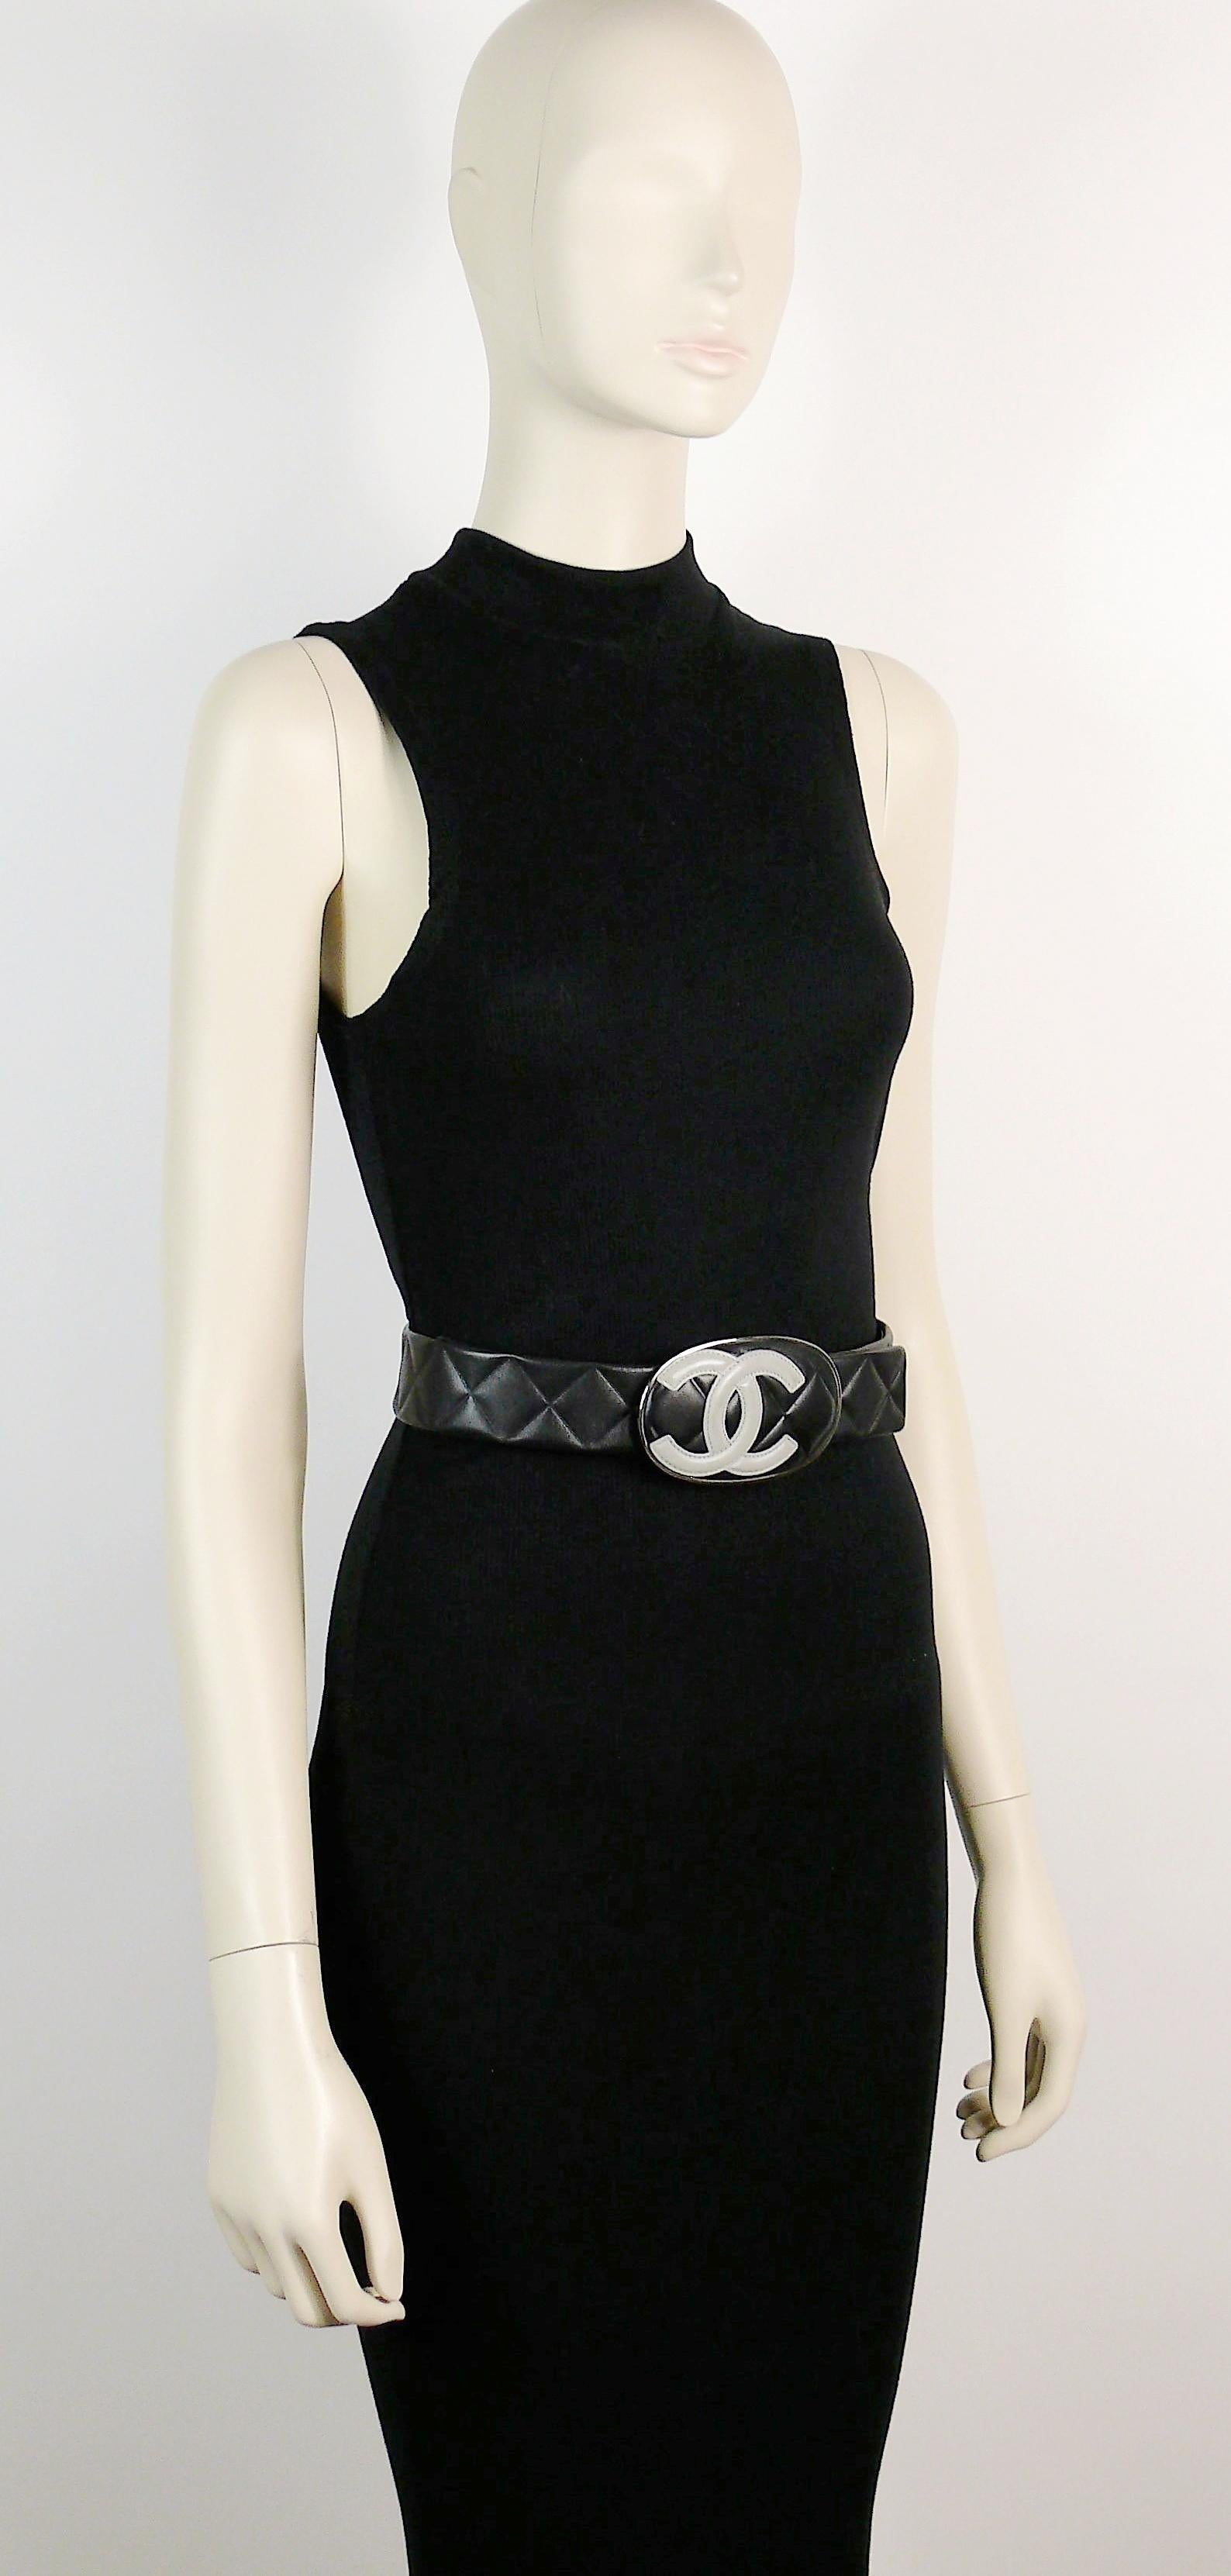 CHANEL black quilted leather wide belt featuring a large polished silver tone buckle with grey CC logo in the Cambon line style.

From the Spring/Summer 2005 ready-to-wear collection. 

Marked CHANEL 05 P Made in France.
Size 75/30.

Indicative